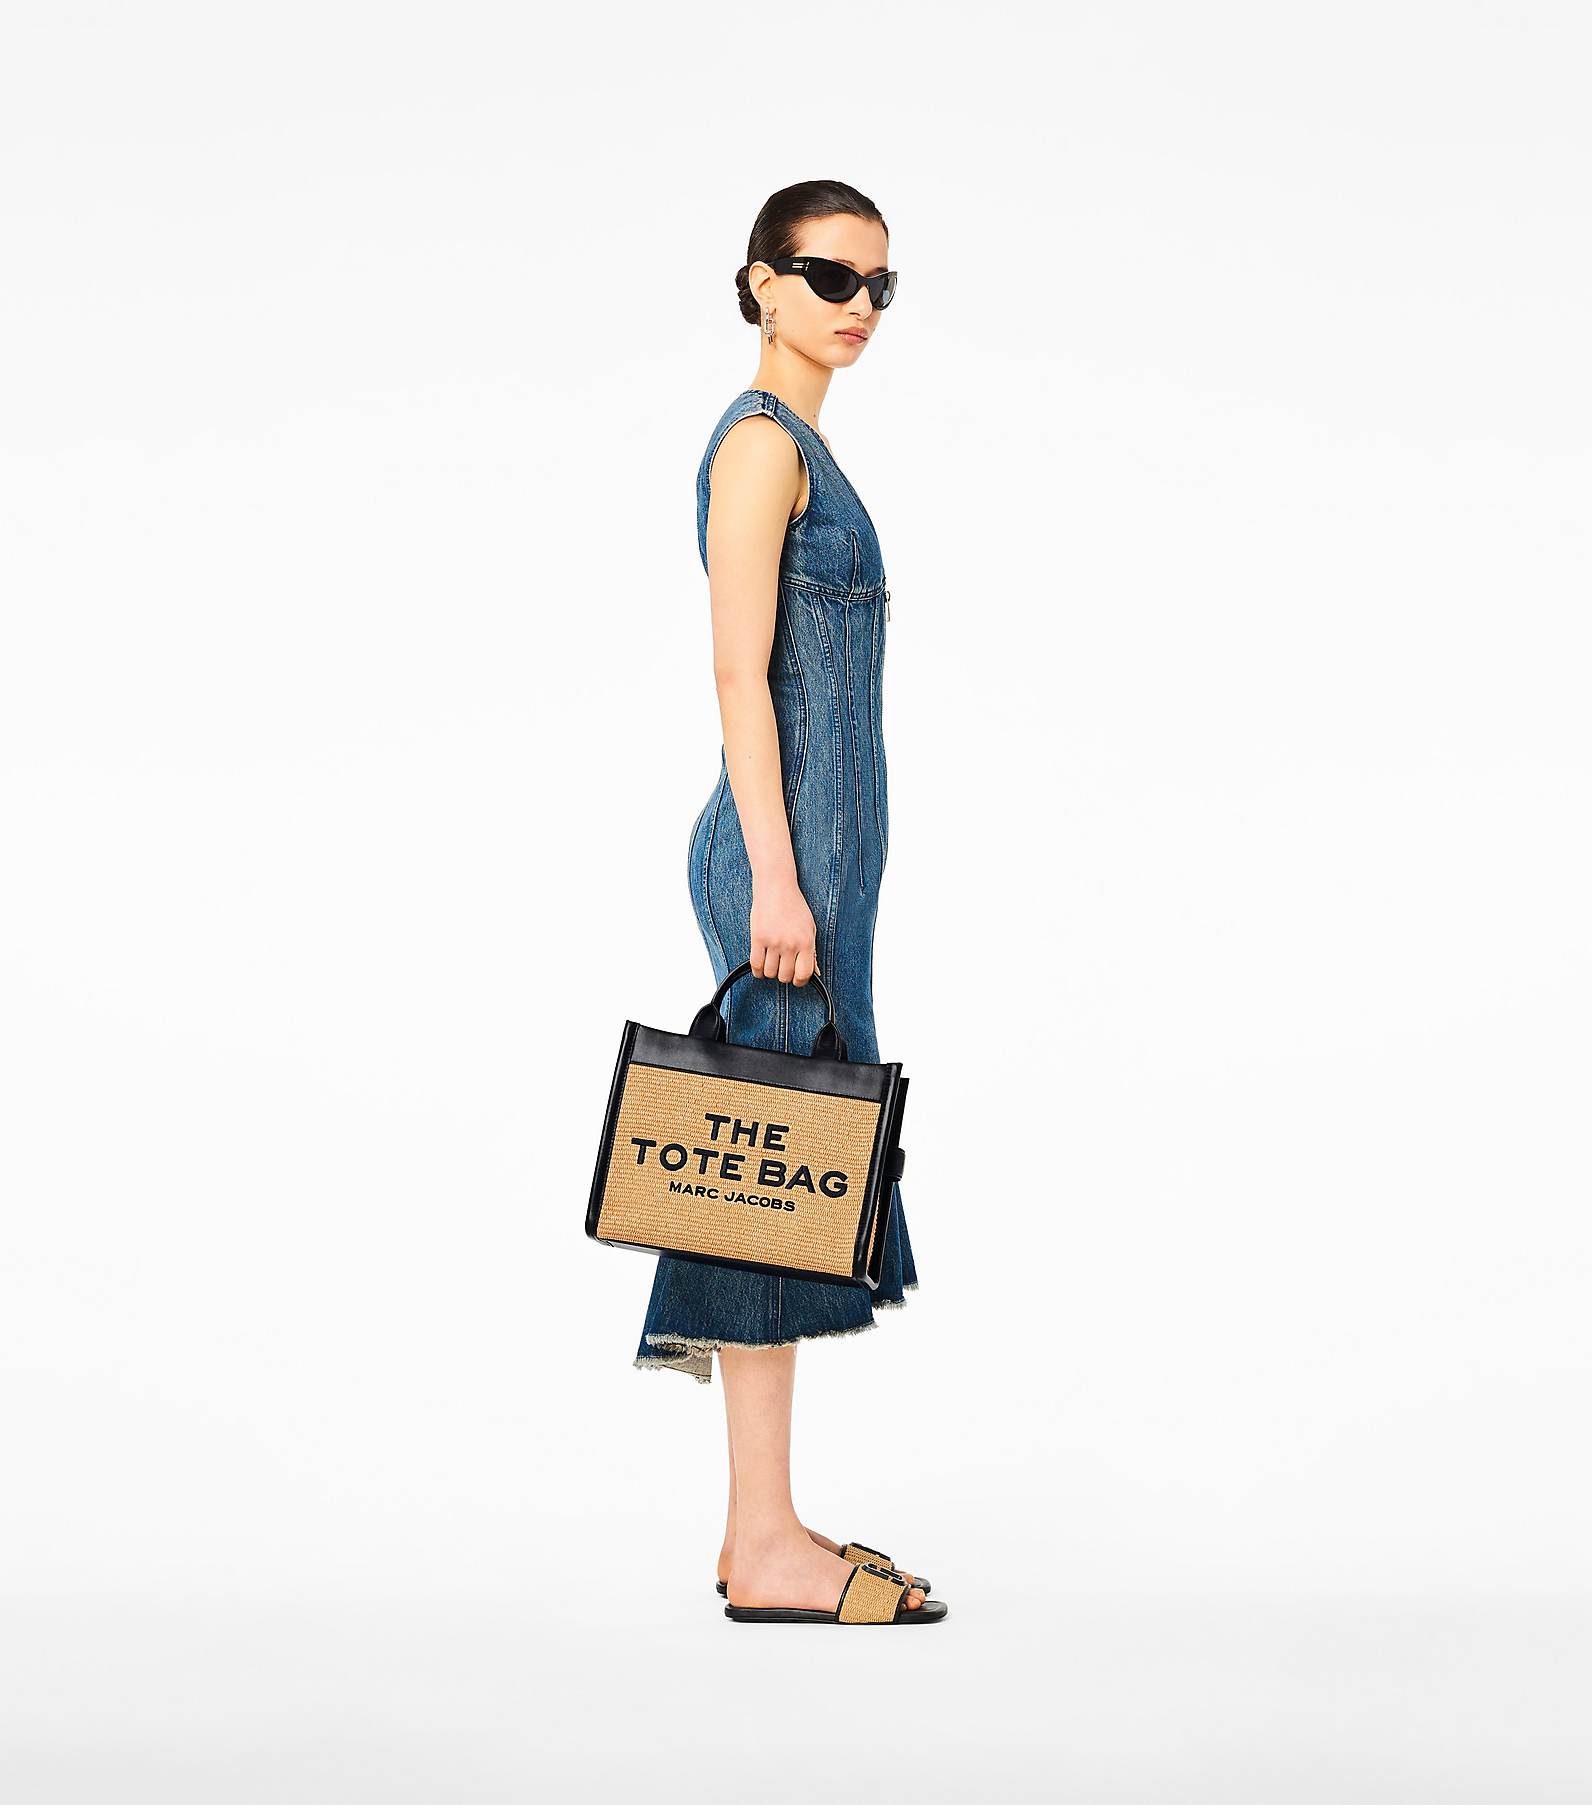 The Medium woven tote bag in beige - Marc Jacobs